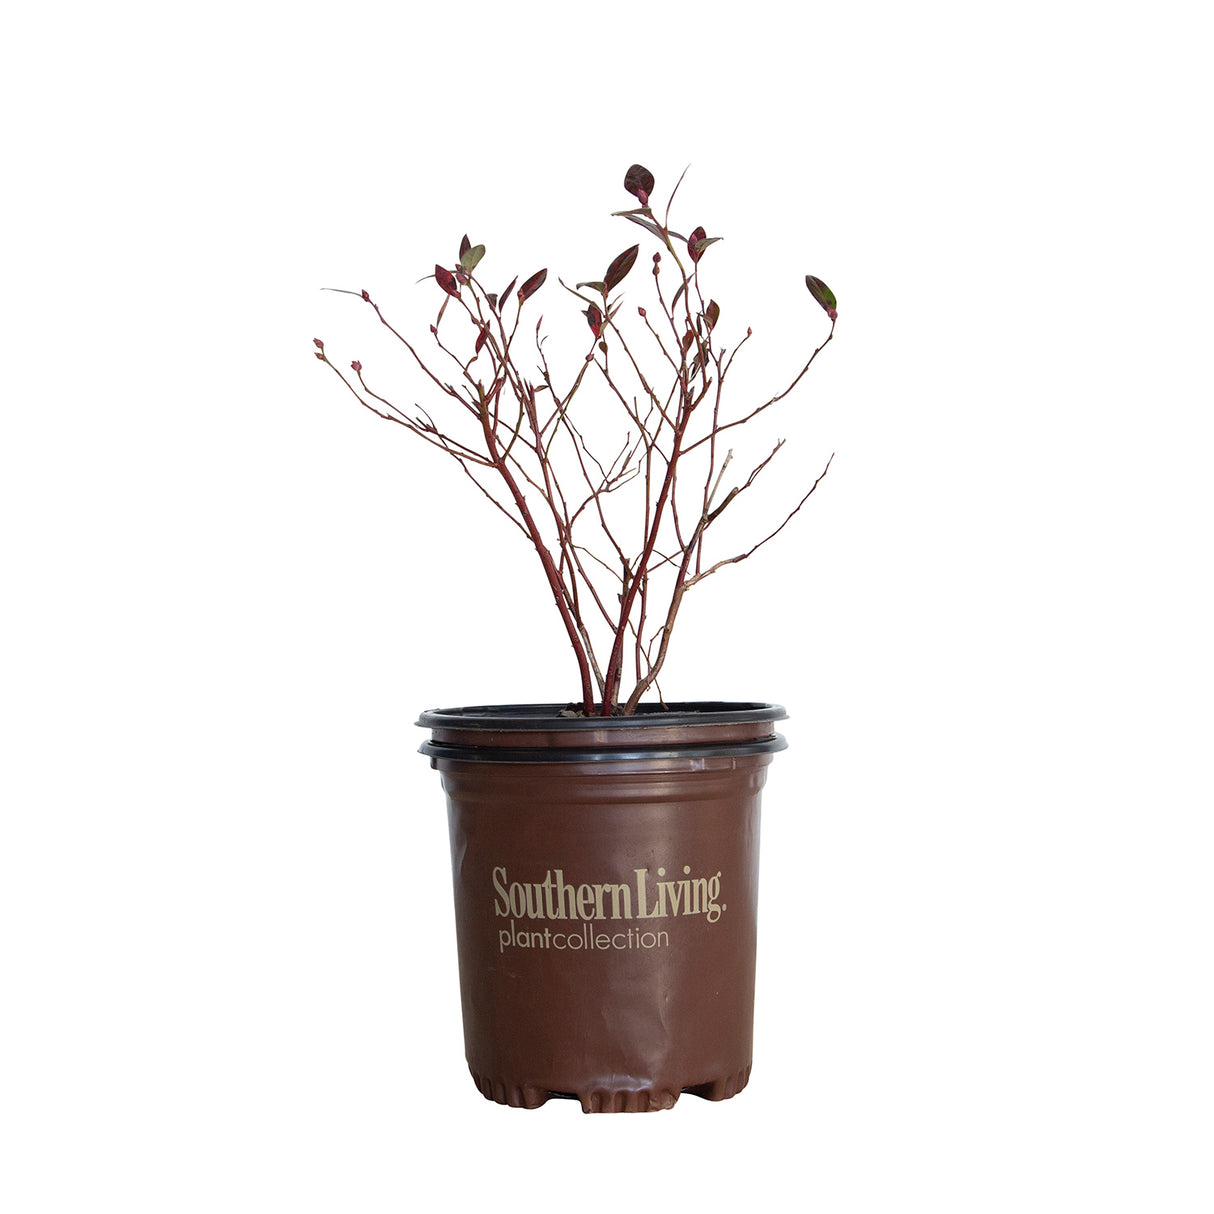 2.5 Quart Hello Darlin Blueberry dormant in brown southern living container